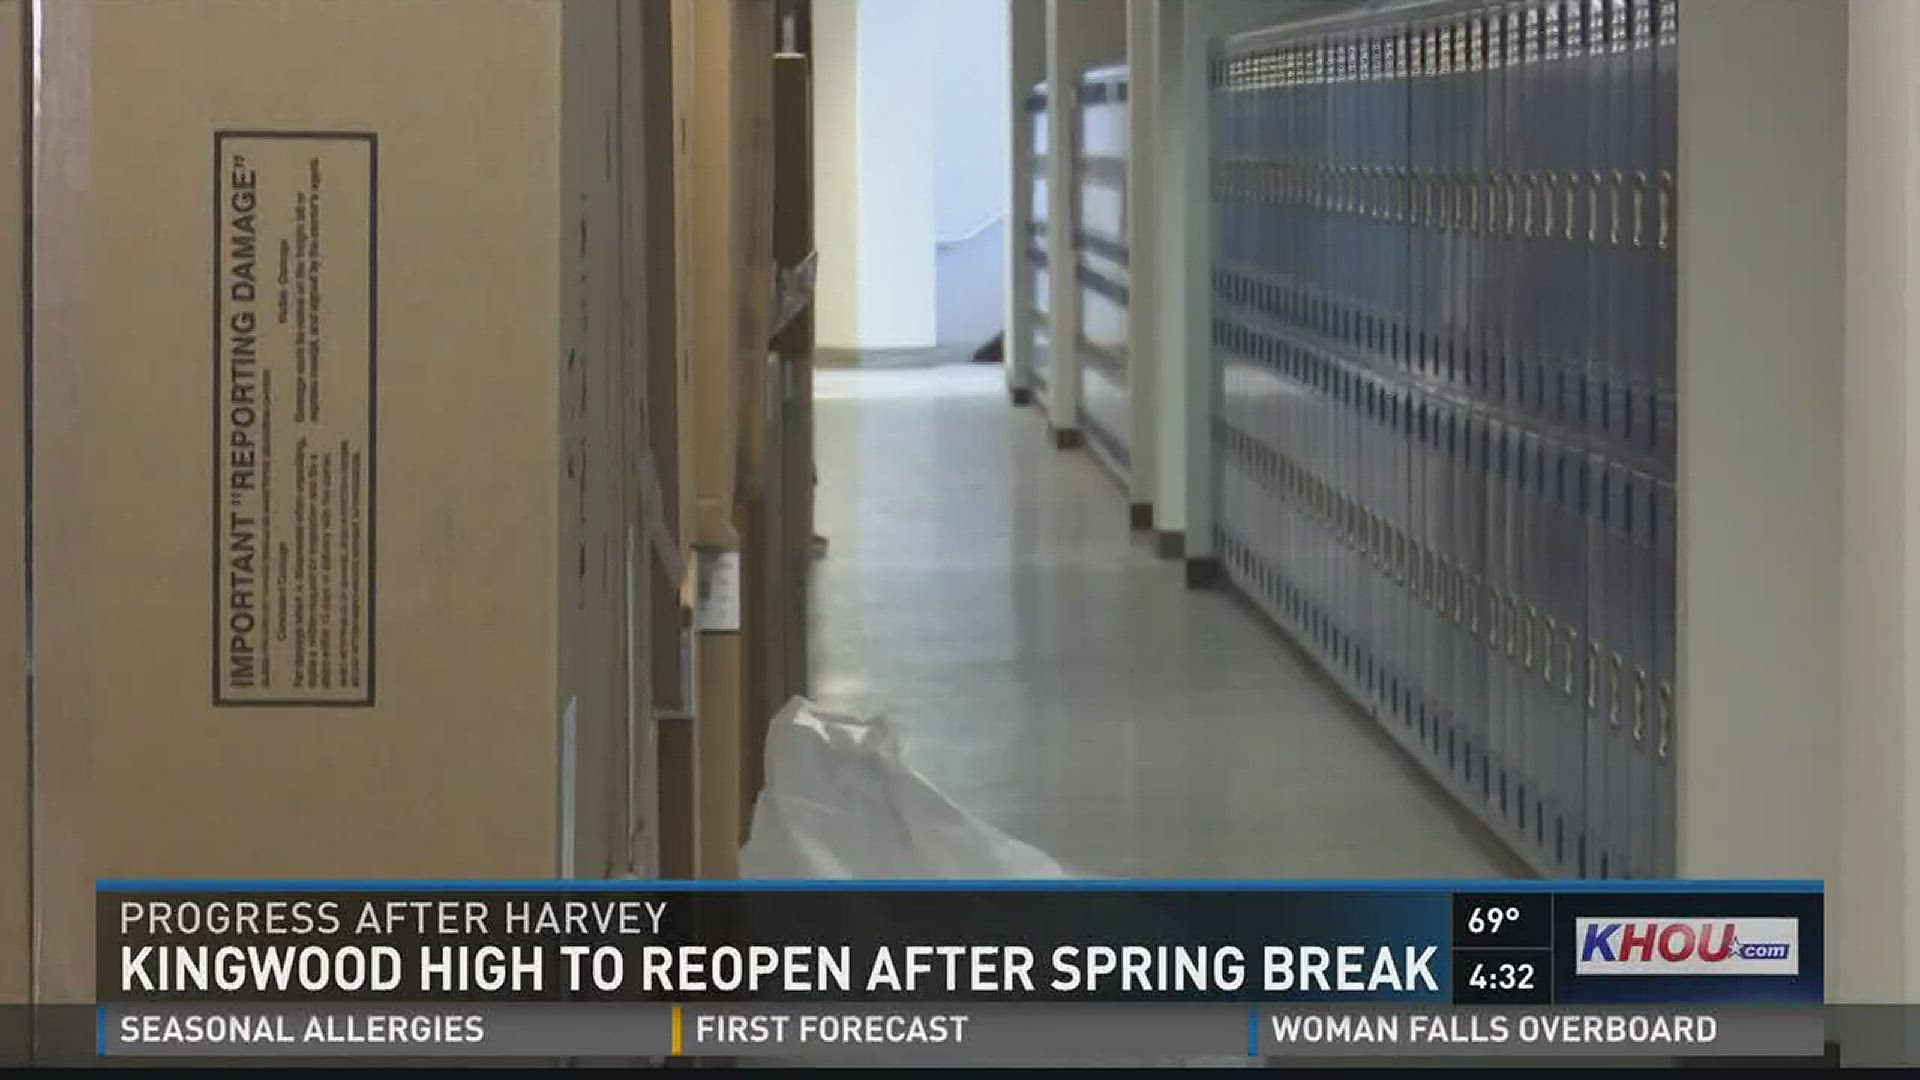 When the students come back from spring break on March 19, they will finally be back on their own campus after Hurricane Harvey took it from them.